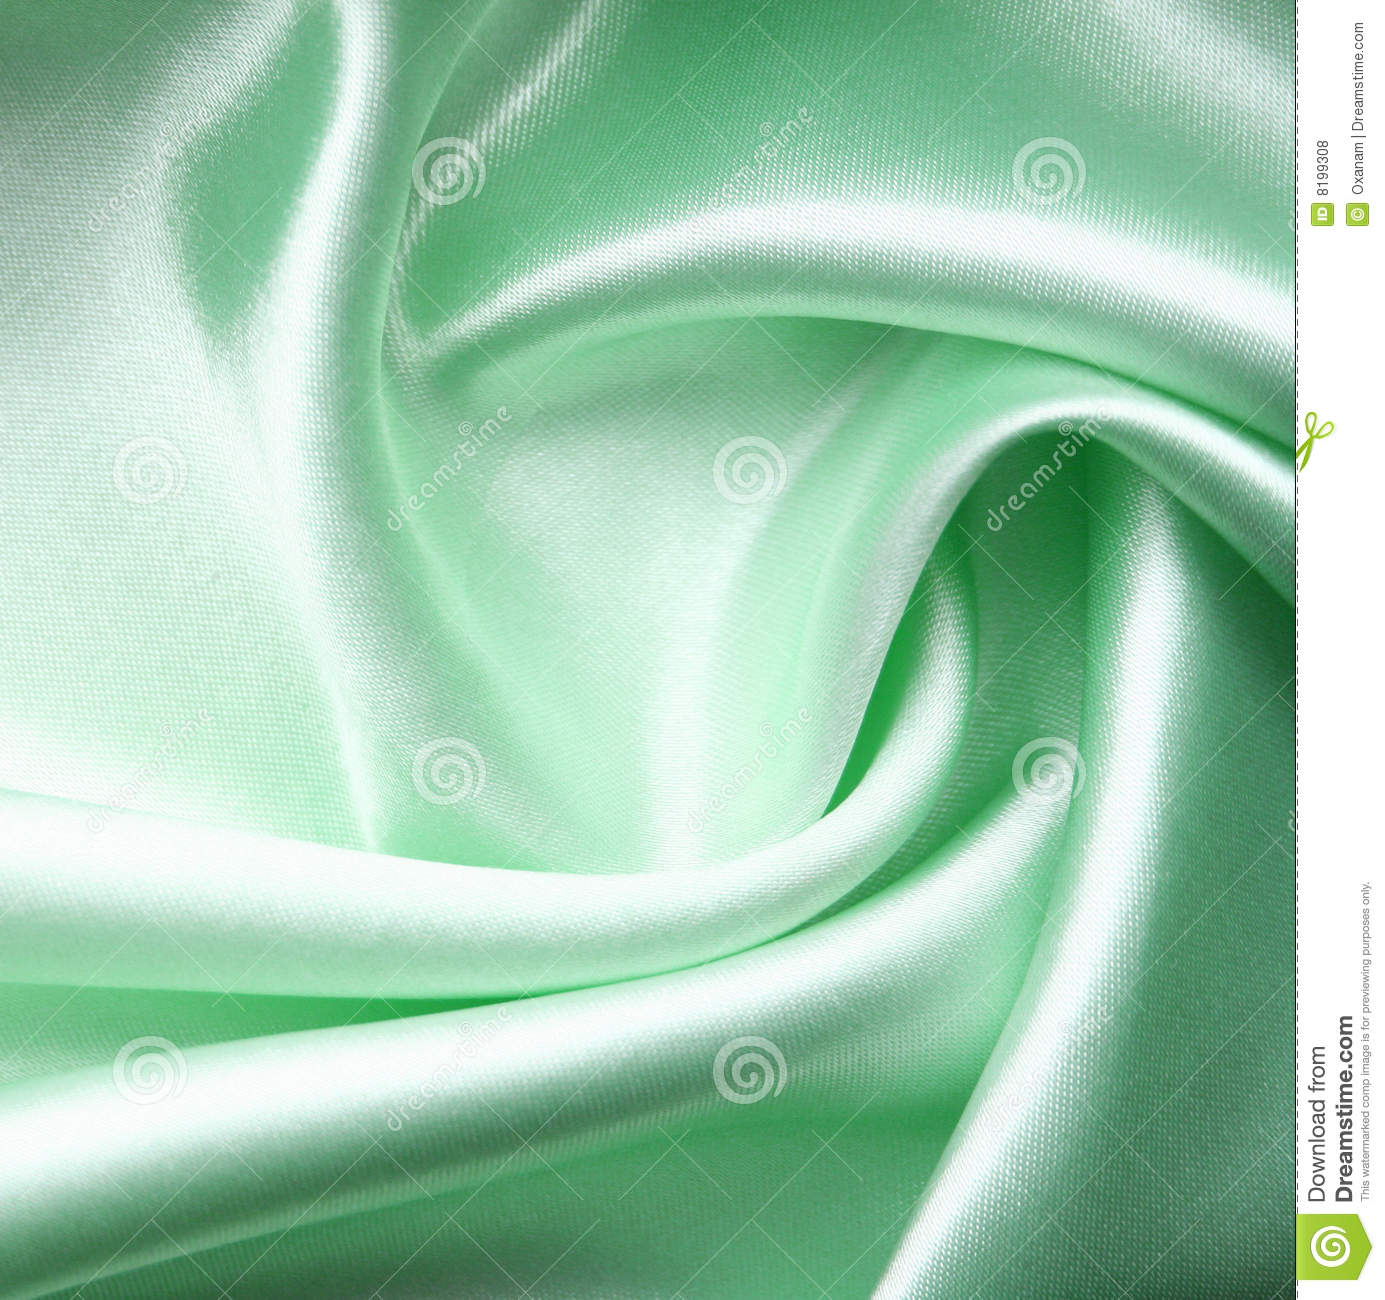 Download Smooth elegant green silk can use as background 1385x1300